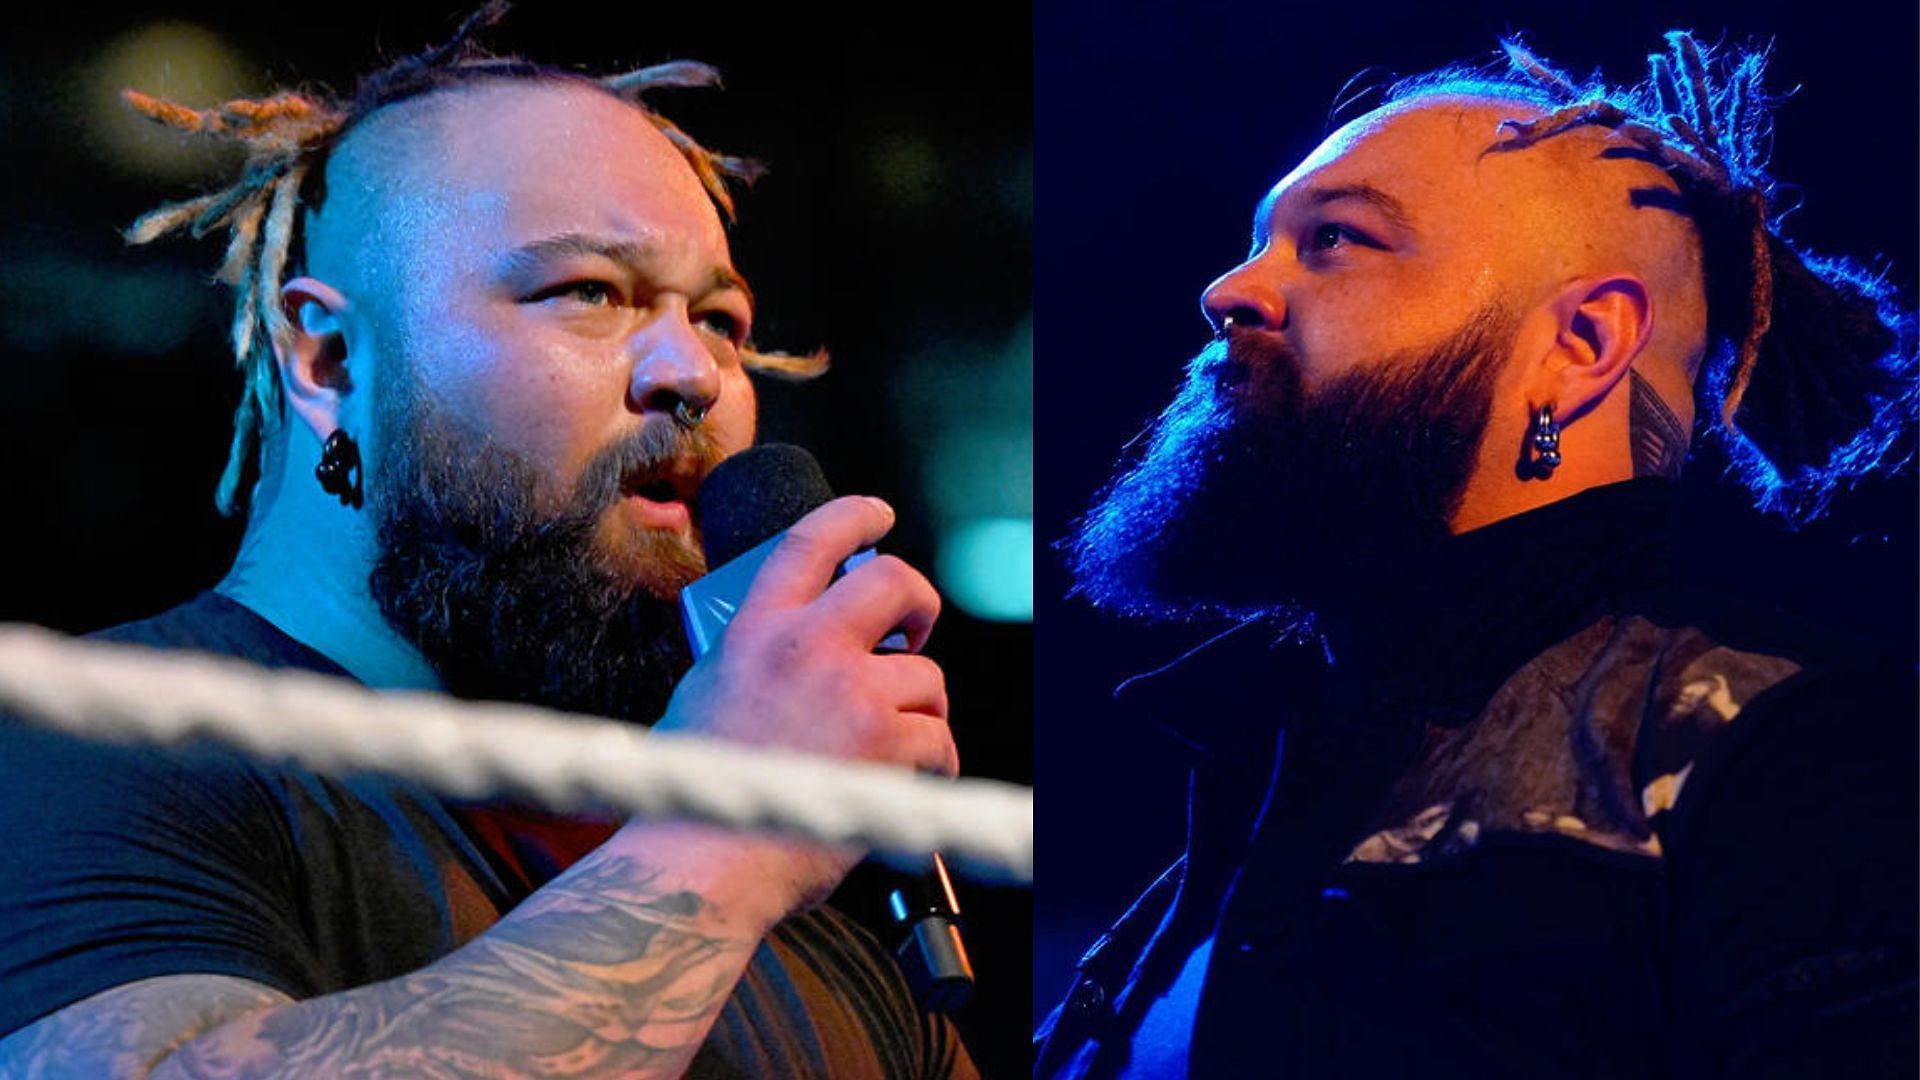 Bray Wyatt is currently not booked for a match at WrestleMania.